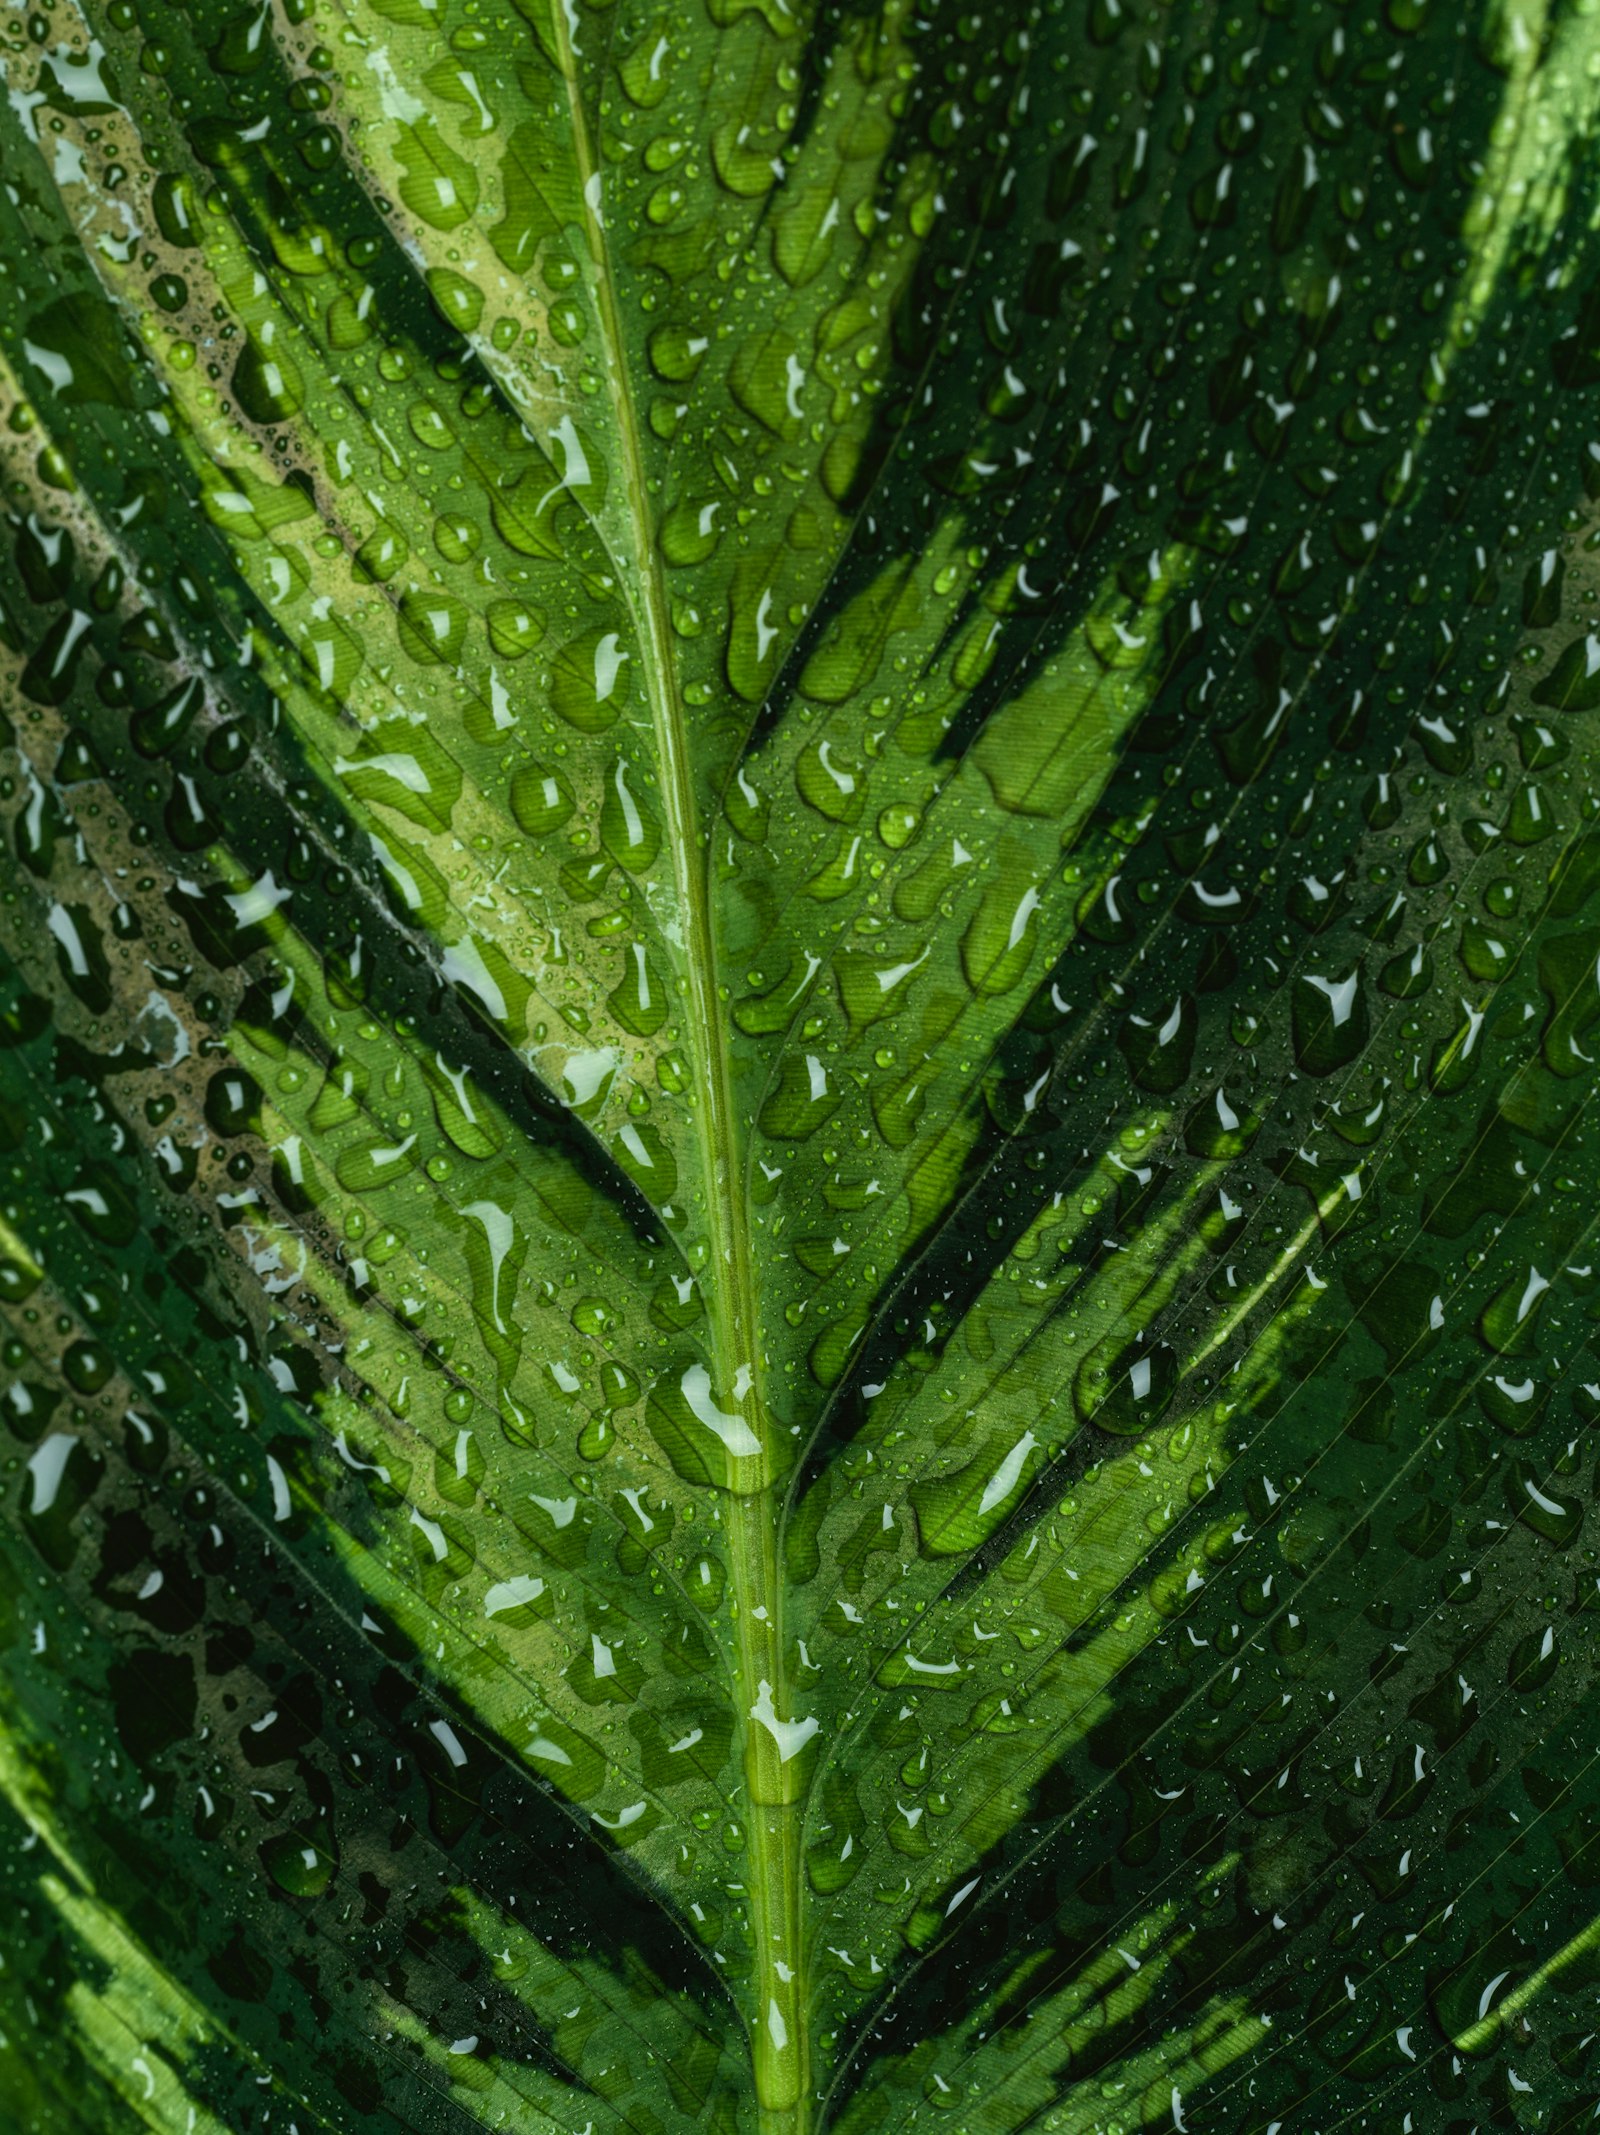 Hasselblad X1D II 50C sample photo. Water droplets on green photography